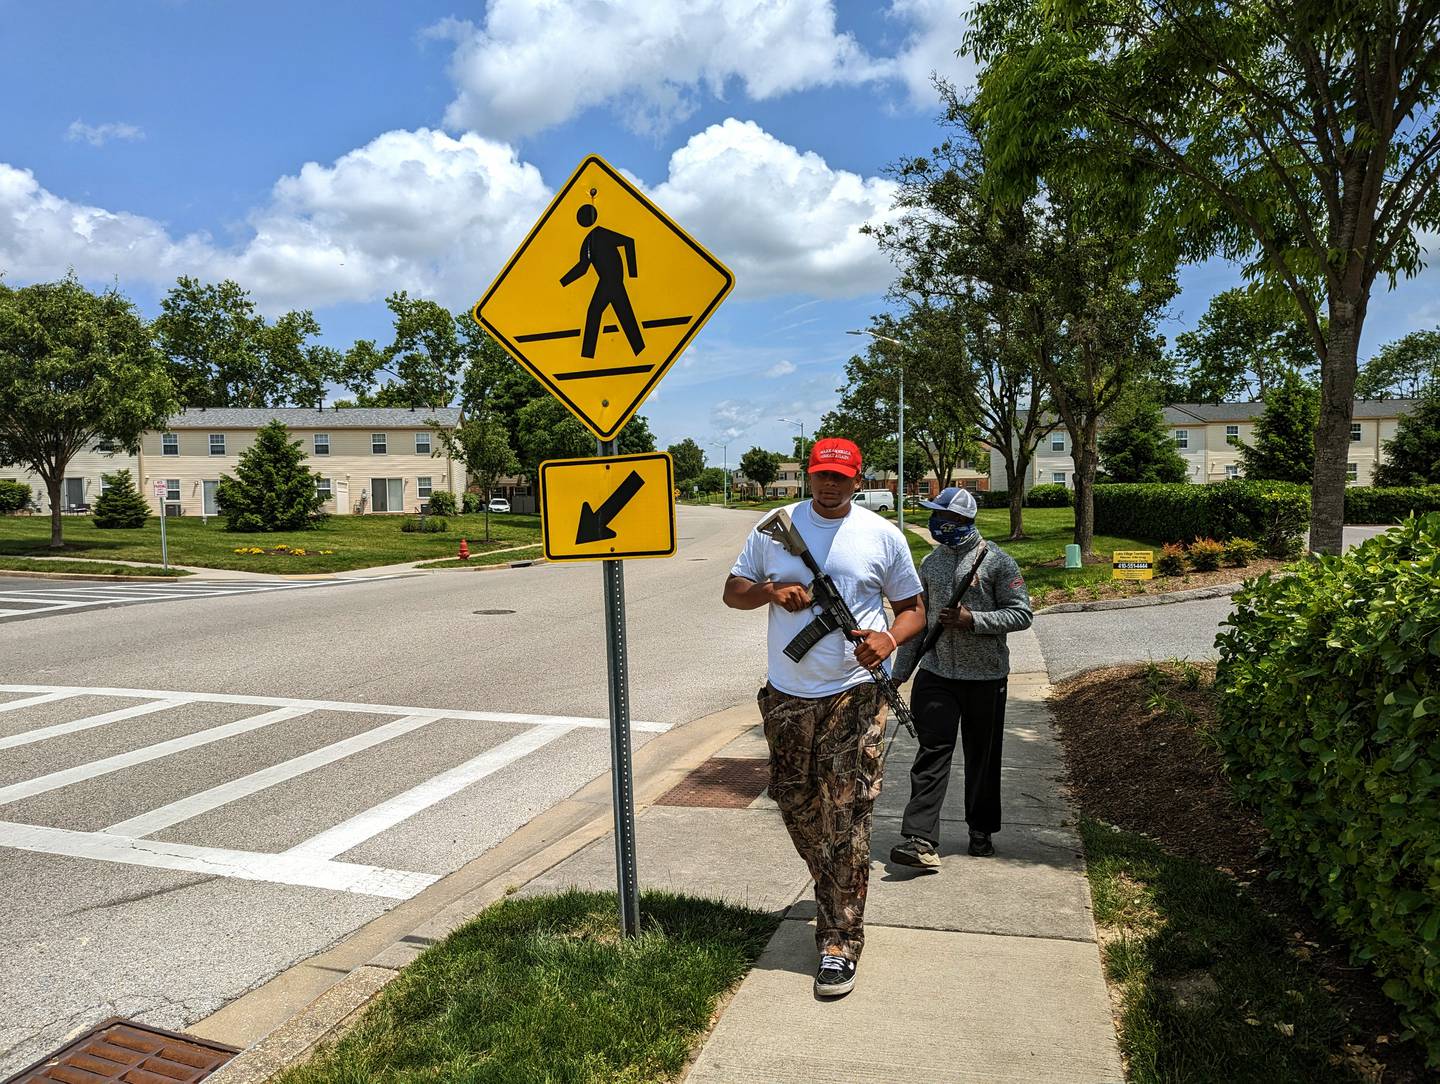 J'den McArdle is staging what he calls a gun rights protest. Some neighbors are scared.